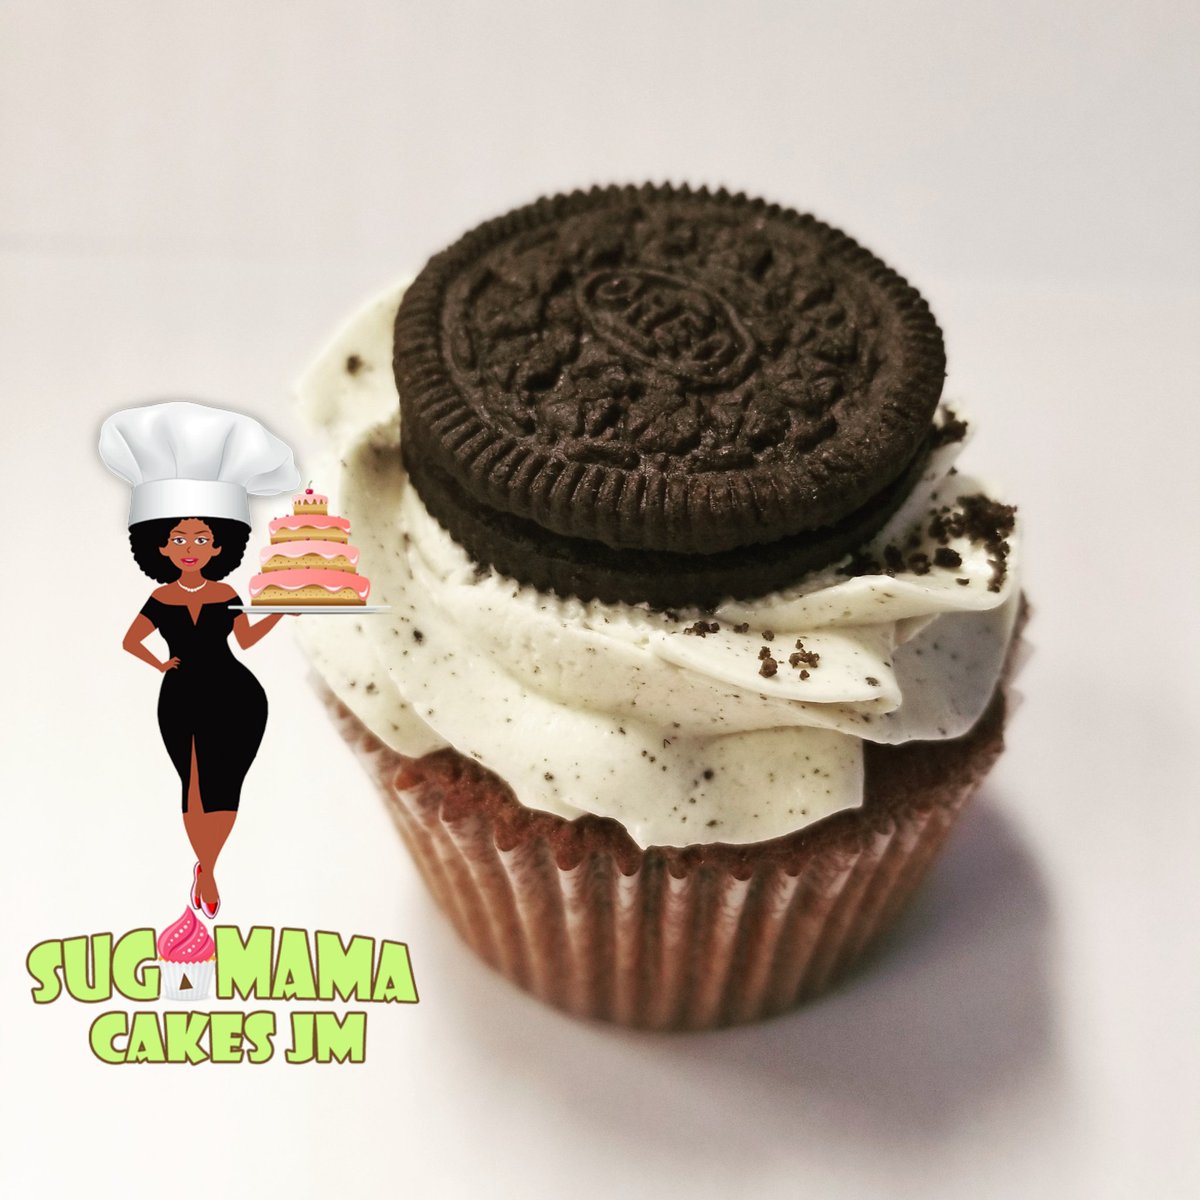 For $3600.00 per dozen, the beloved Oreo Cupcake is a triple threat with a sneaky surprise on the inside. #cupcake #oreo #oreocupcake #yummy #yummyfood #sweettreat #foodporn #pastryjunkie #cupcakeaddict #sugarrush #sugamamacakesjm #bakeday #bakelife #chocolate #chocolatecupcake